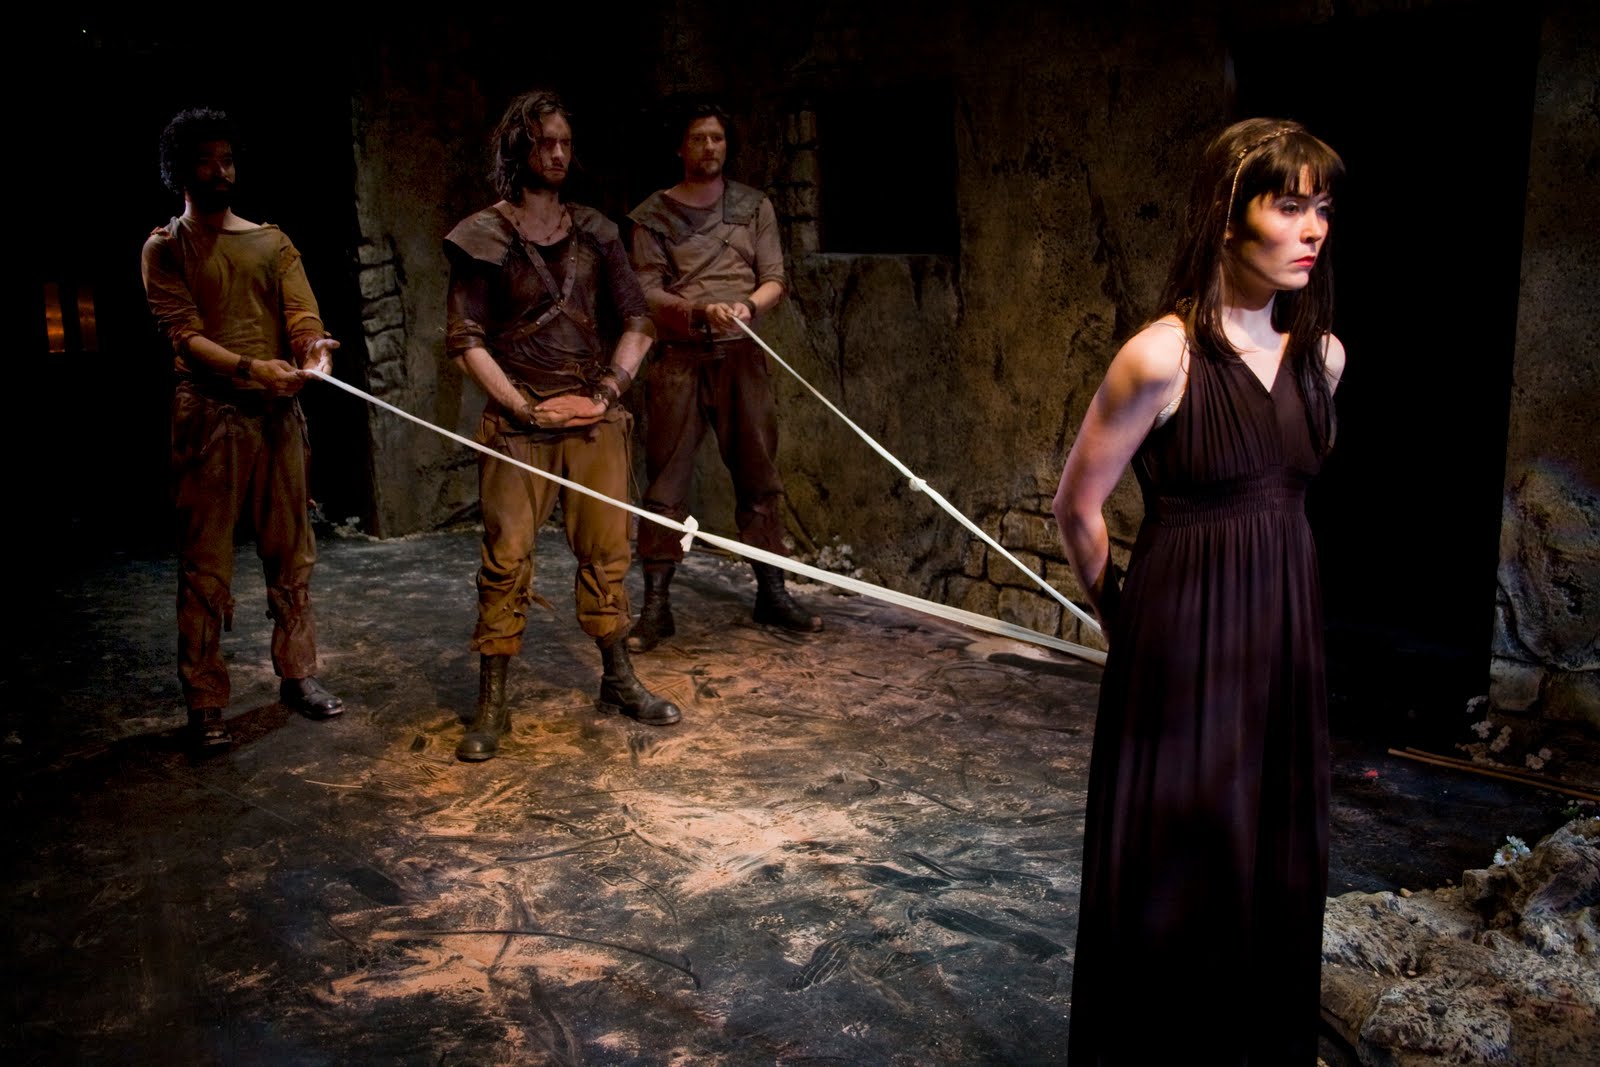 Death conquers love in antigone a play by sophocles